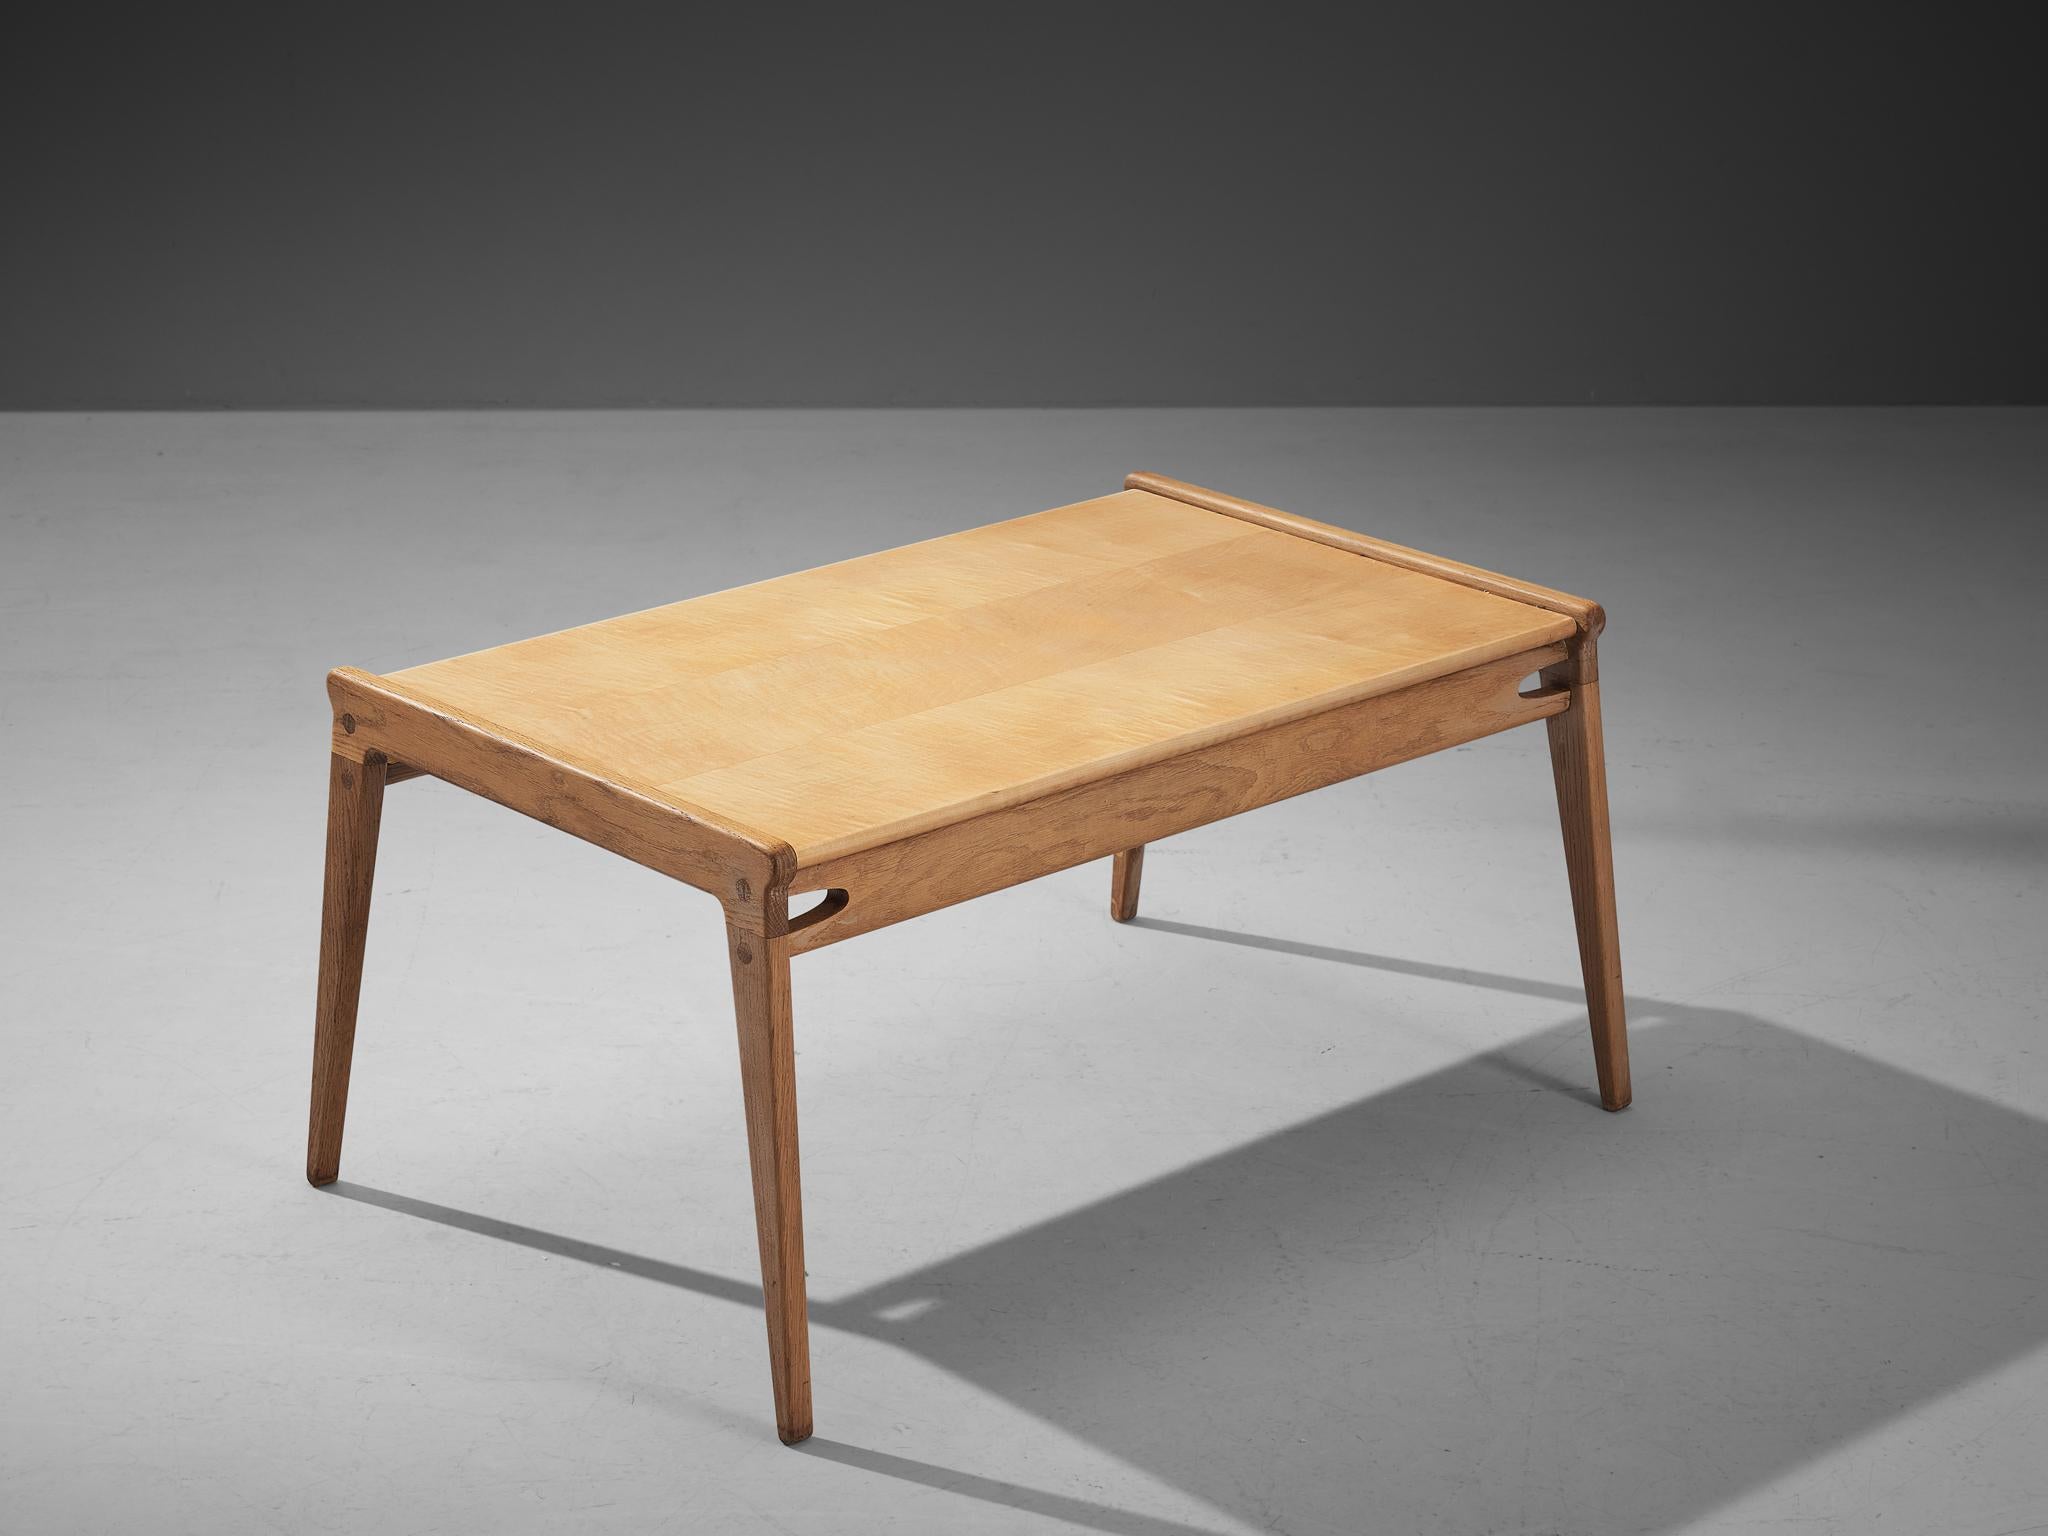 Coffee table, maple, oak Denmark, 1960s

This cocktail table of Danish origin has a splendid construction that embodies a simplistic, natural and timeless aesthetic. A unique detail to the design are the small cut outs on each side just below the